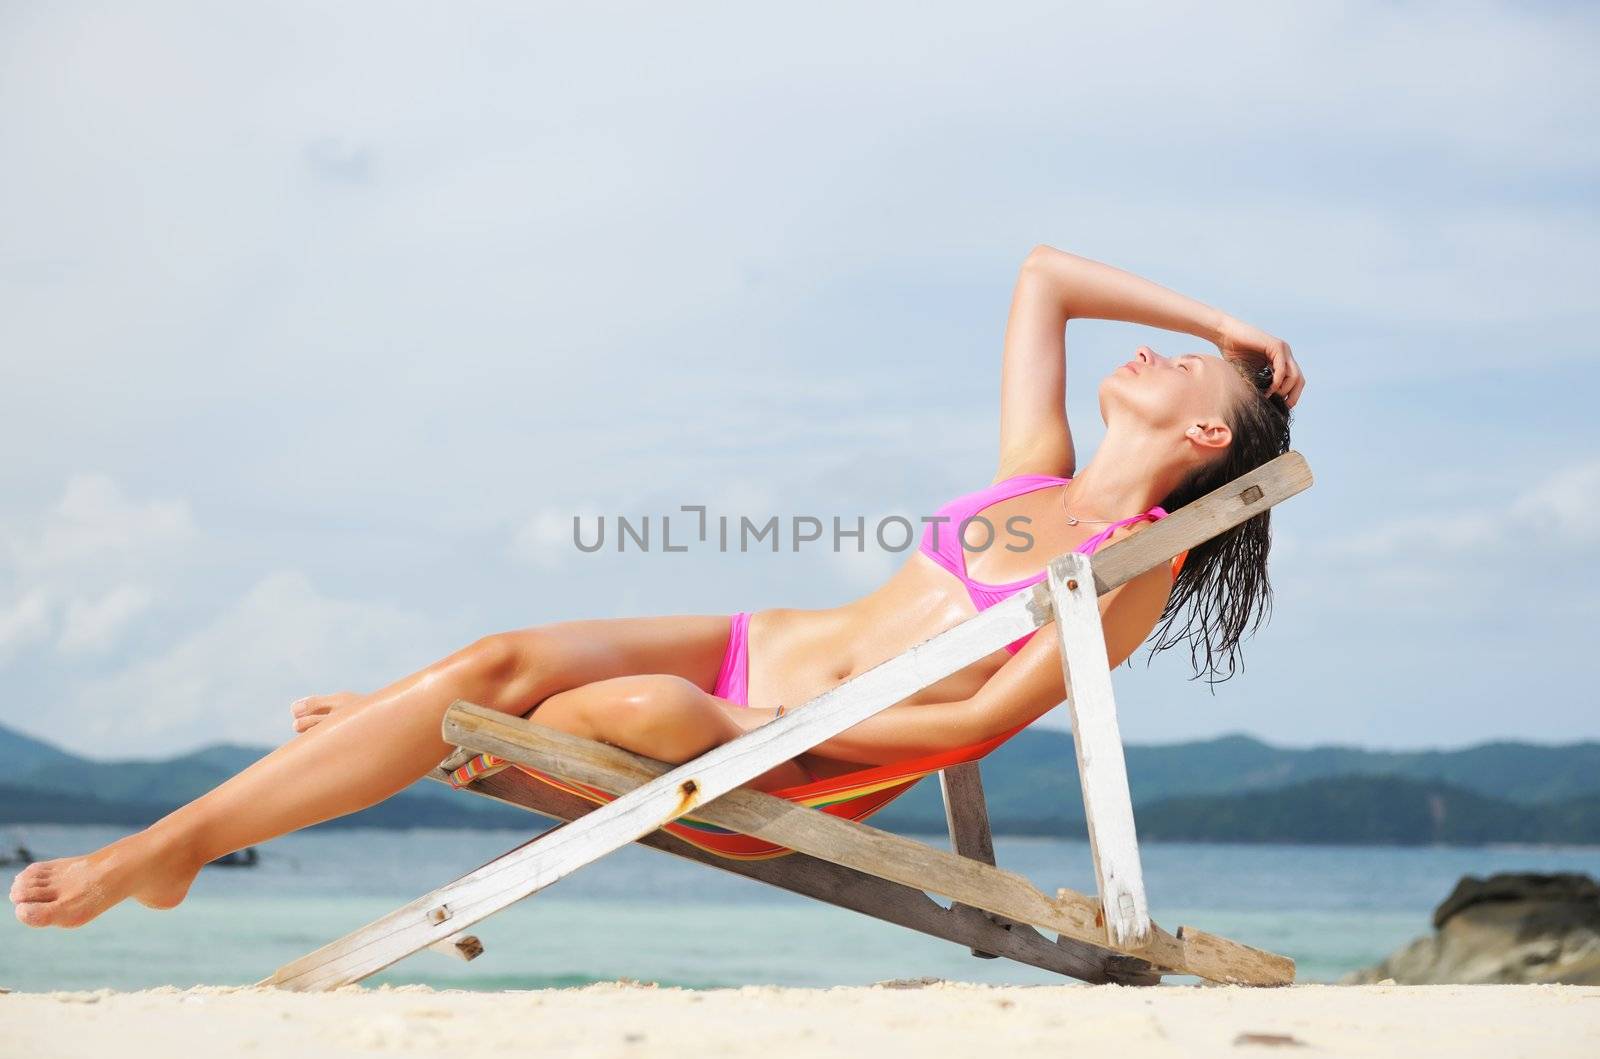 Girl on a tropical beach sitting in chaise lounge